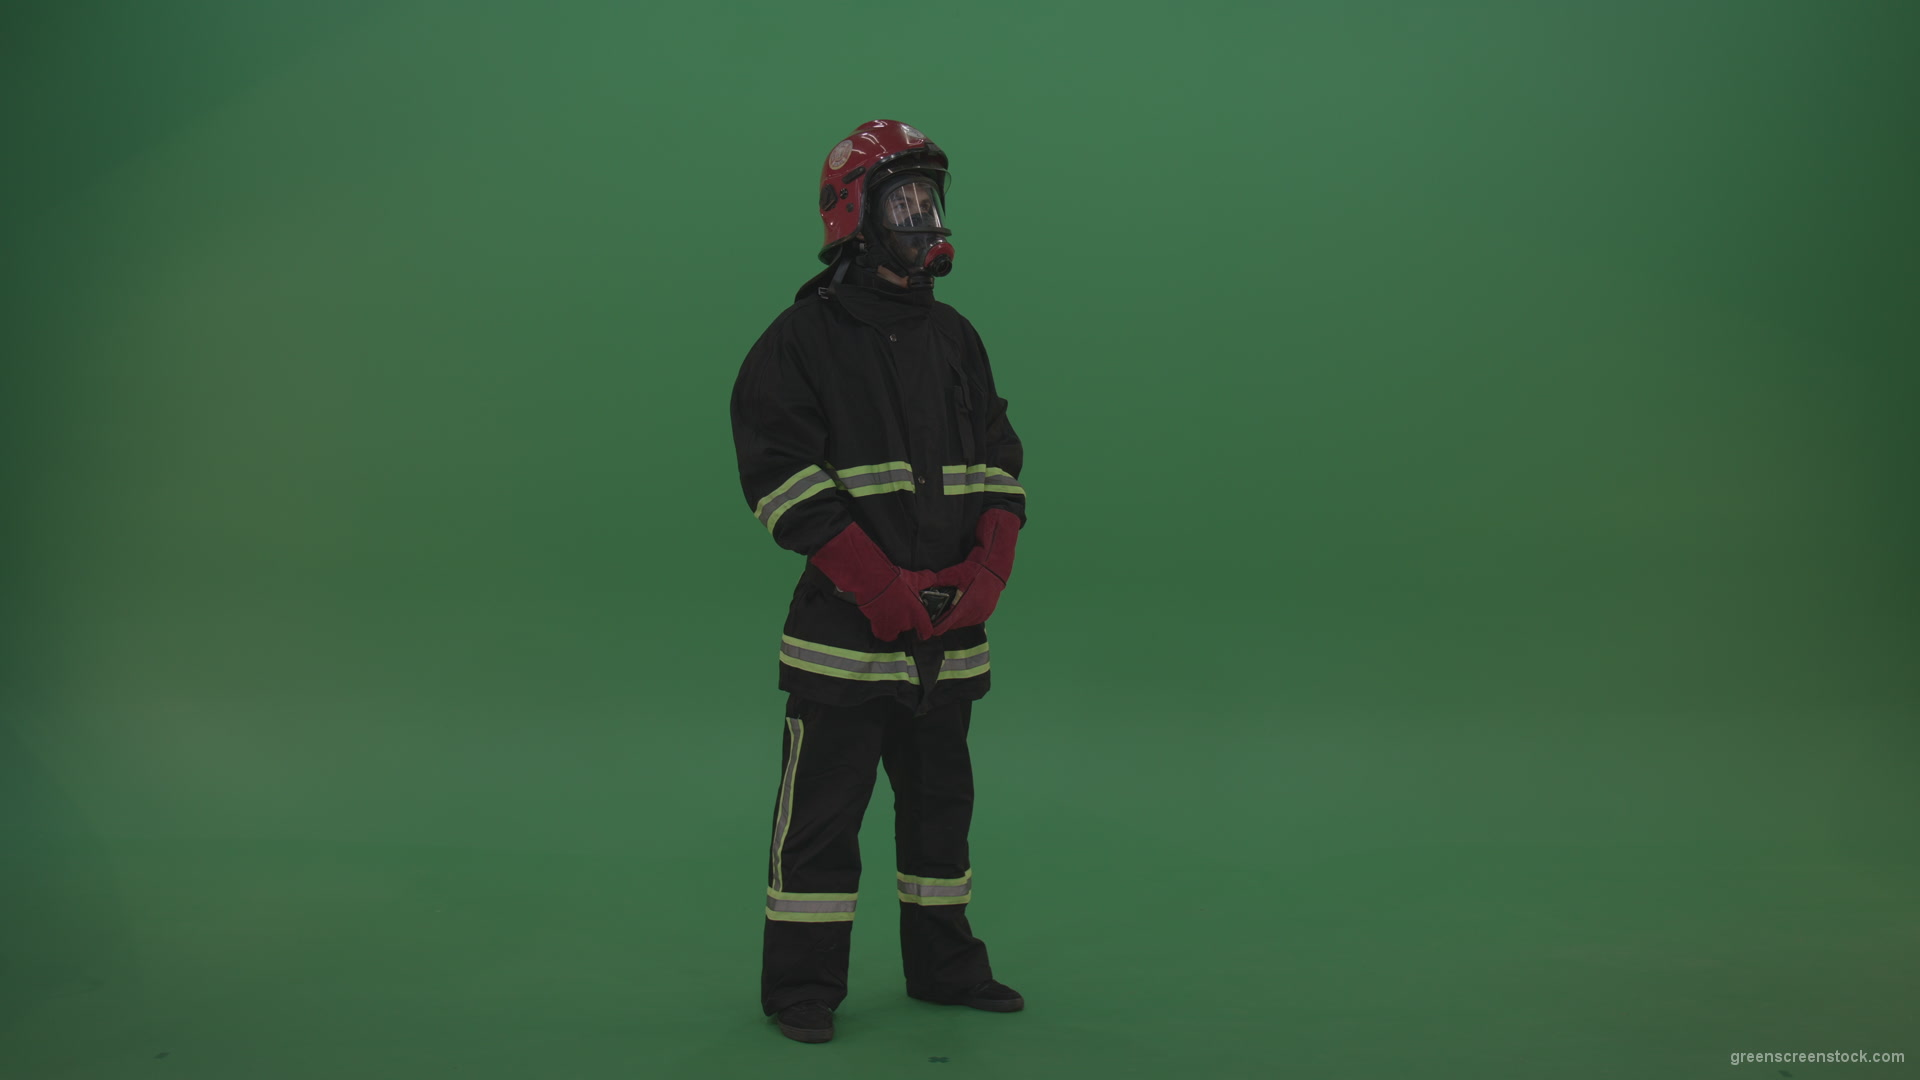 Young_Firefighter_Wearing_Full_FIreman_Working_Kit_Looking_Around_To_Fing_Some_Fire_Arson_Problems_On_Green_Screen_Wall_Background_001 Green Screen Stock